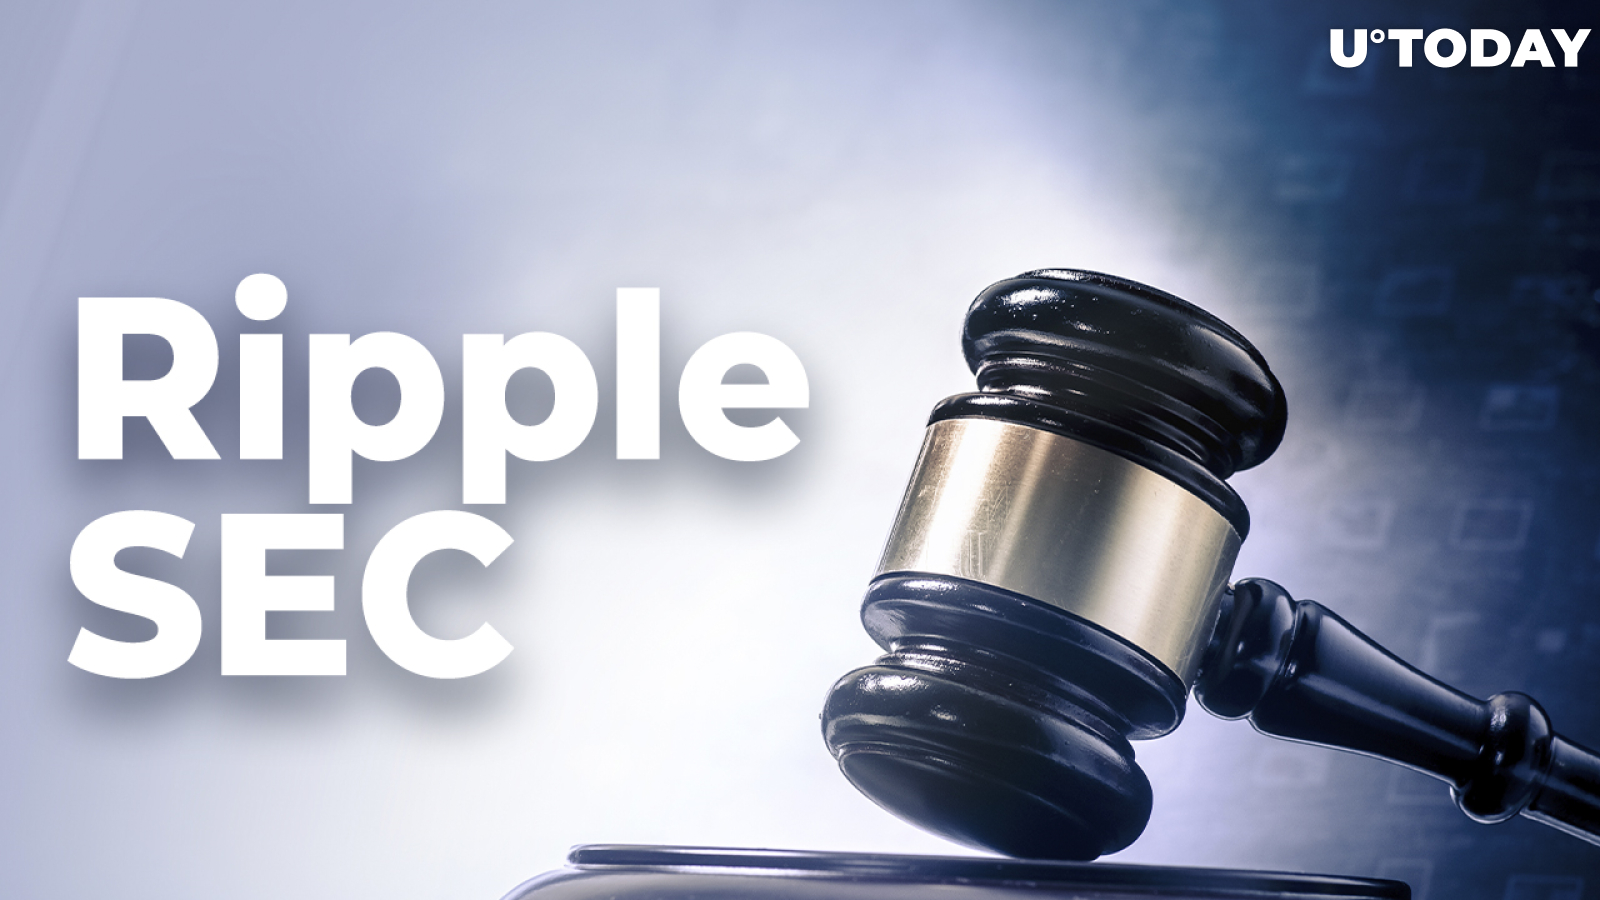 Ripple-SEC Lawsuit: This Might Be the Biggest Decision for XRP per John Deaton